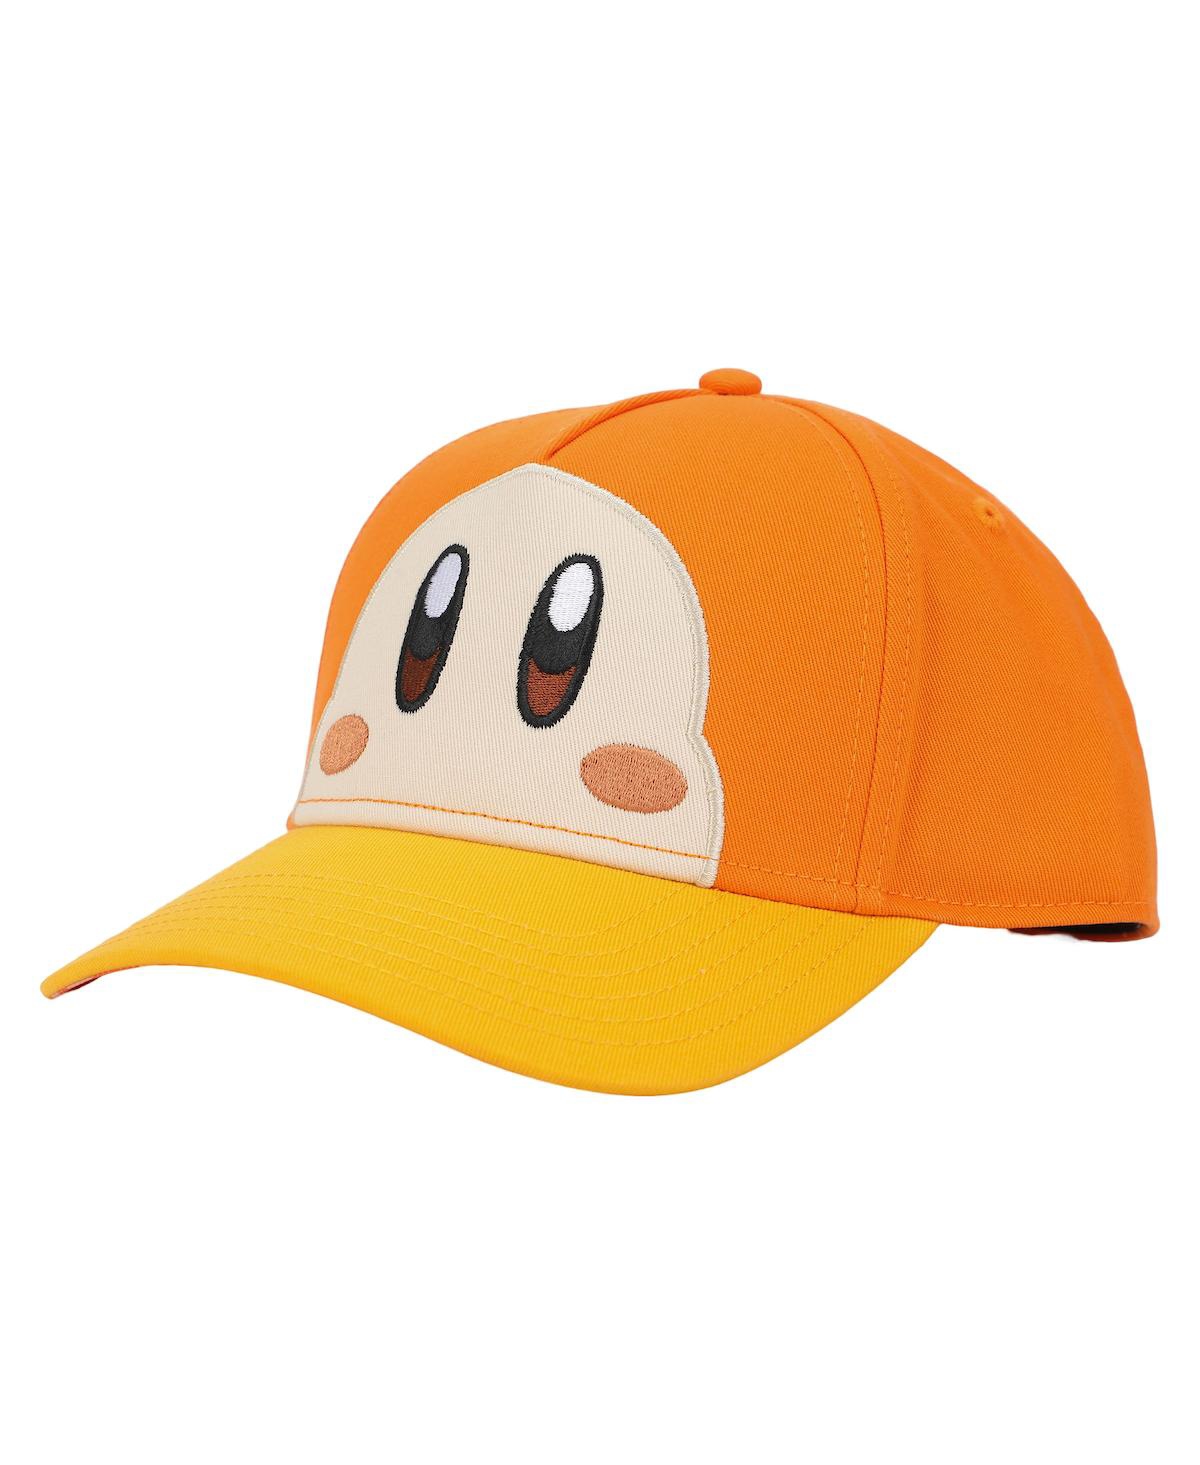 Men's Waddle Dee Face Hat with Sublimated Underbill Art - Orange